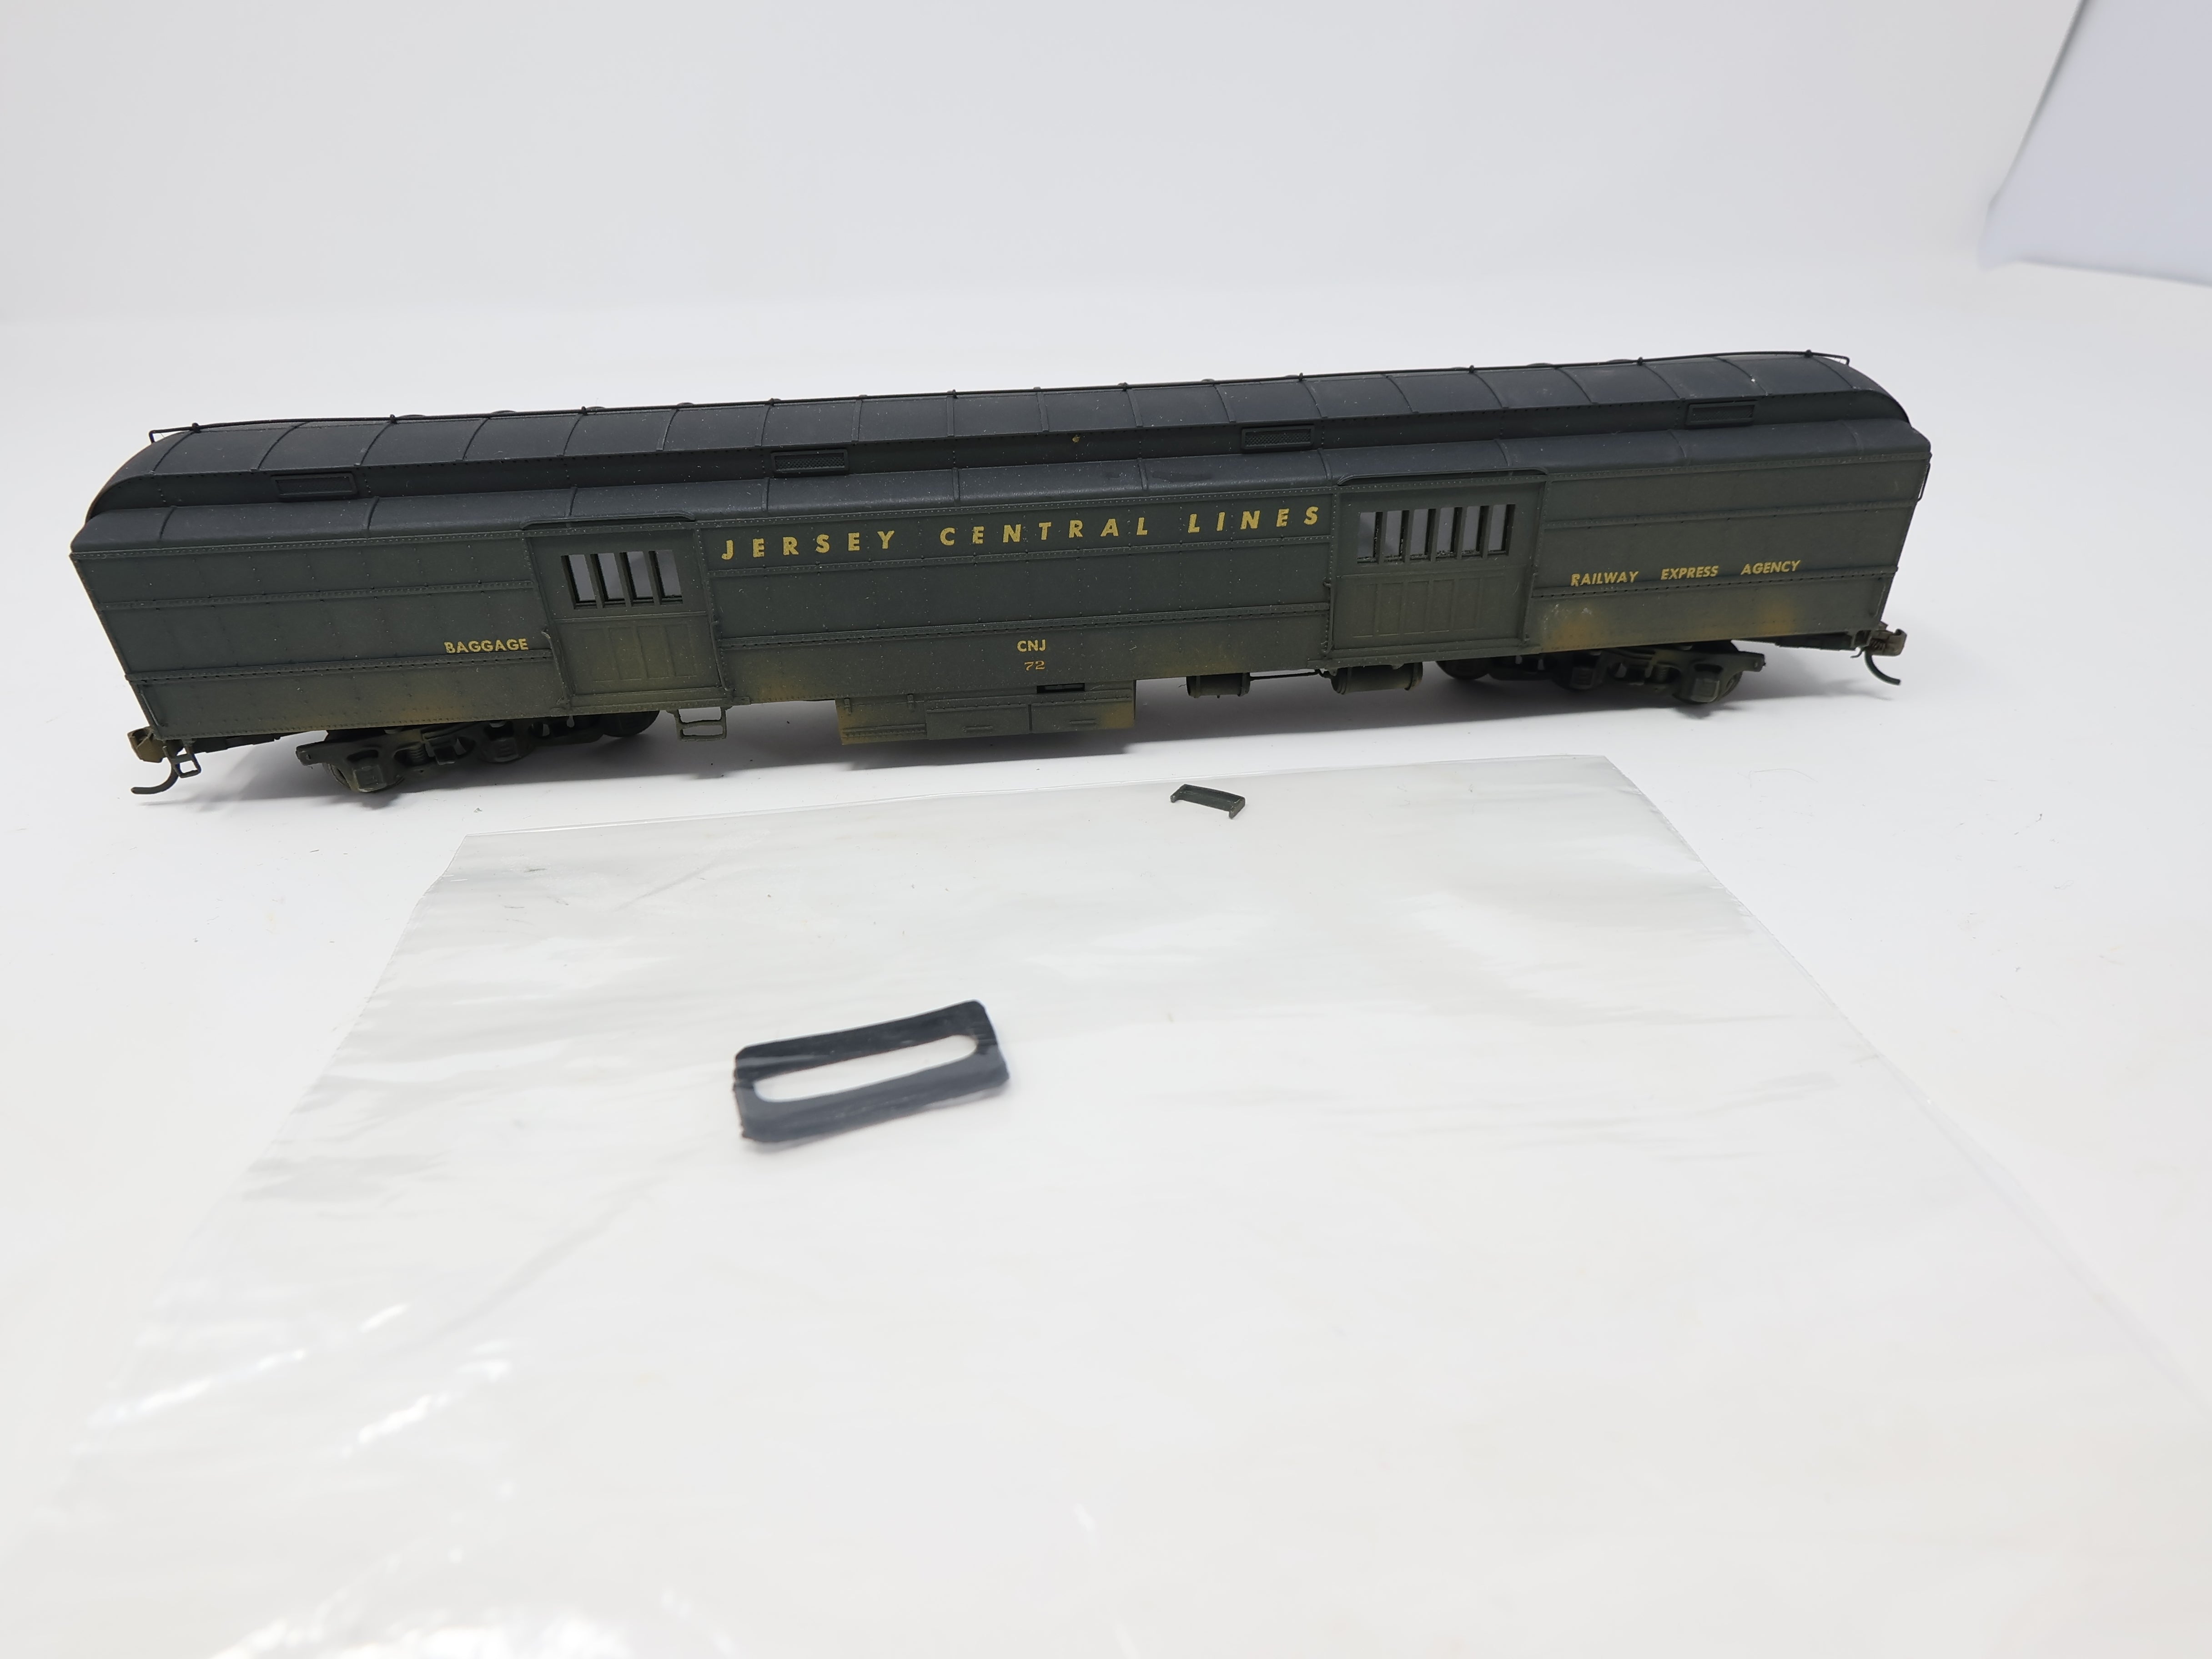 USED Athearn HO Scale, Weathered Bagggae Car Railway Express Agency, Central Railroad of New Jersey CNJ #72